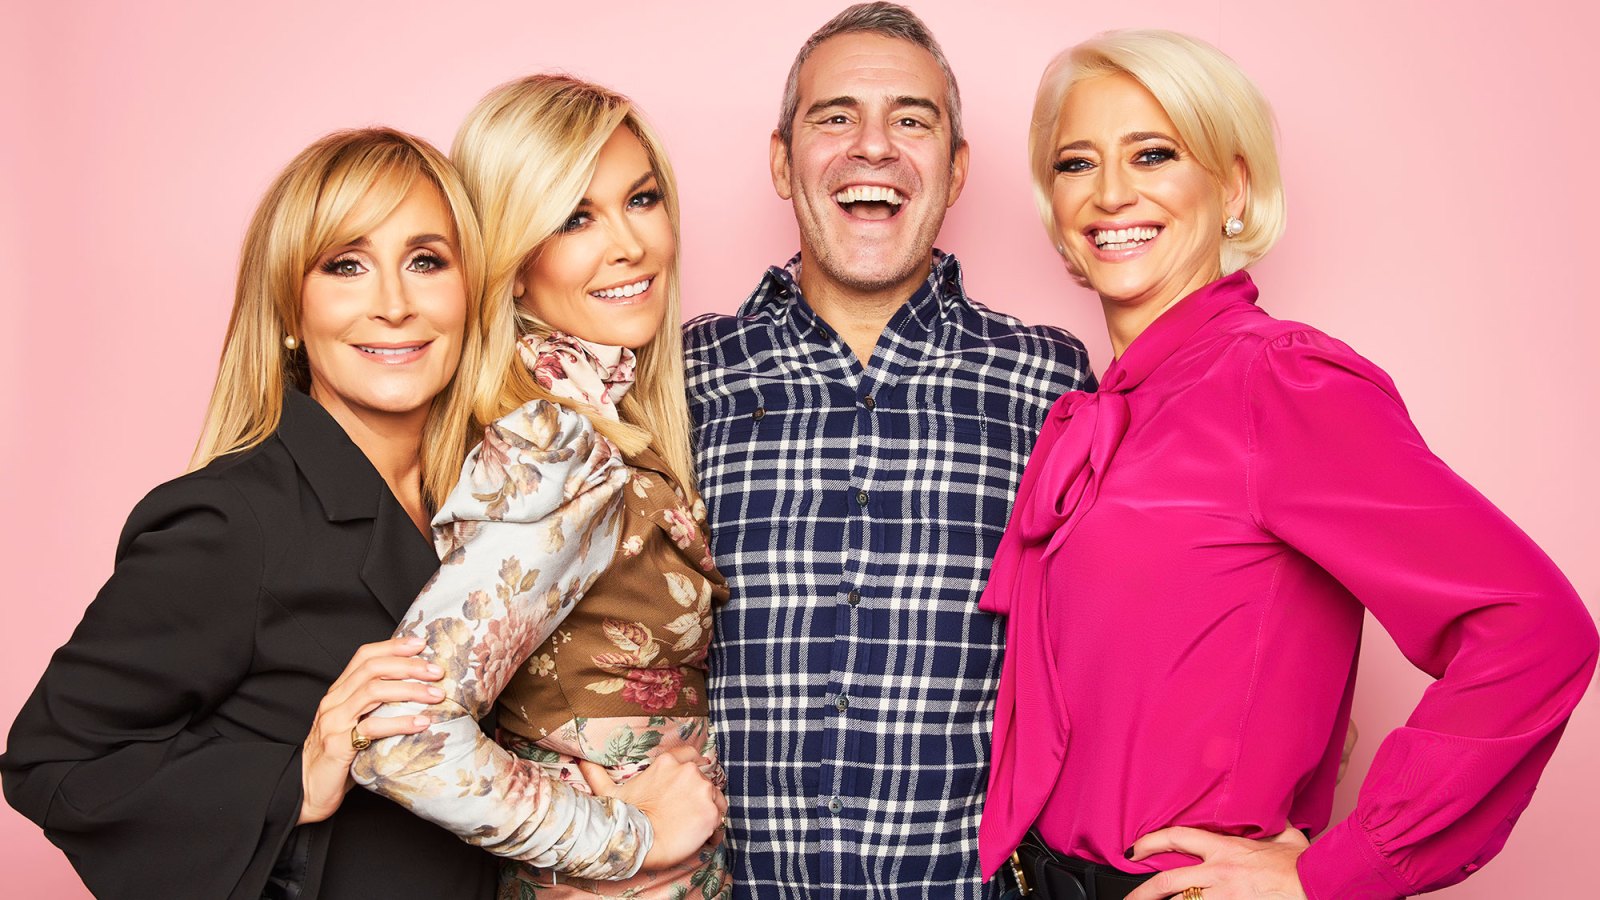 Sonja Morgan, Tinsley Mortimer, Andy Cohen, and Dorinda Medley Andy Cohen Says the Real Housewives Have Been ‘Incredible’ Since His Son's Birth: ‘They’re All Great Moms’